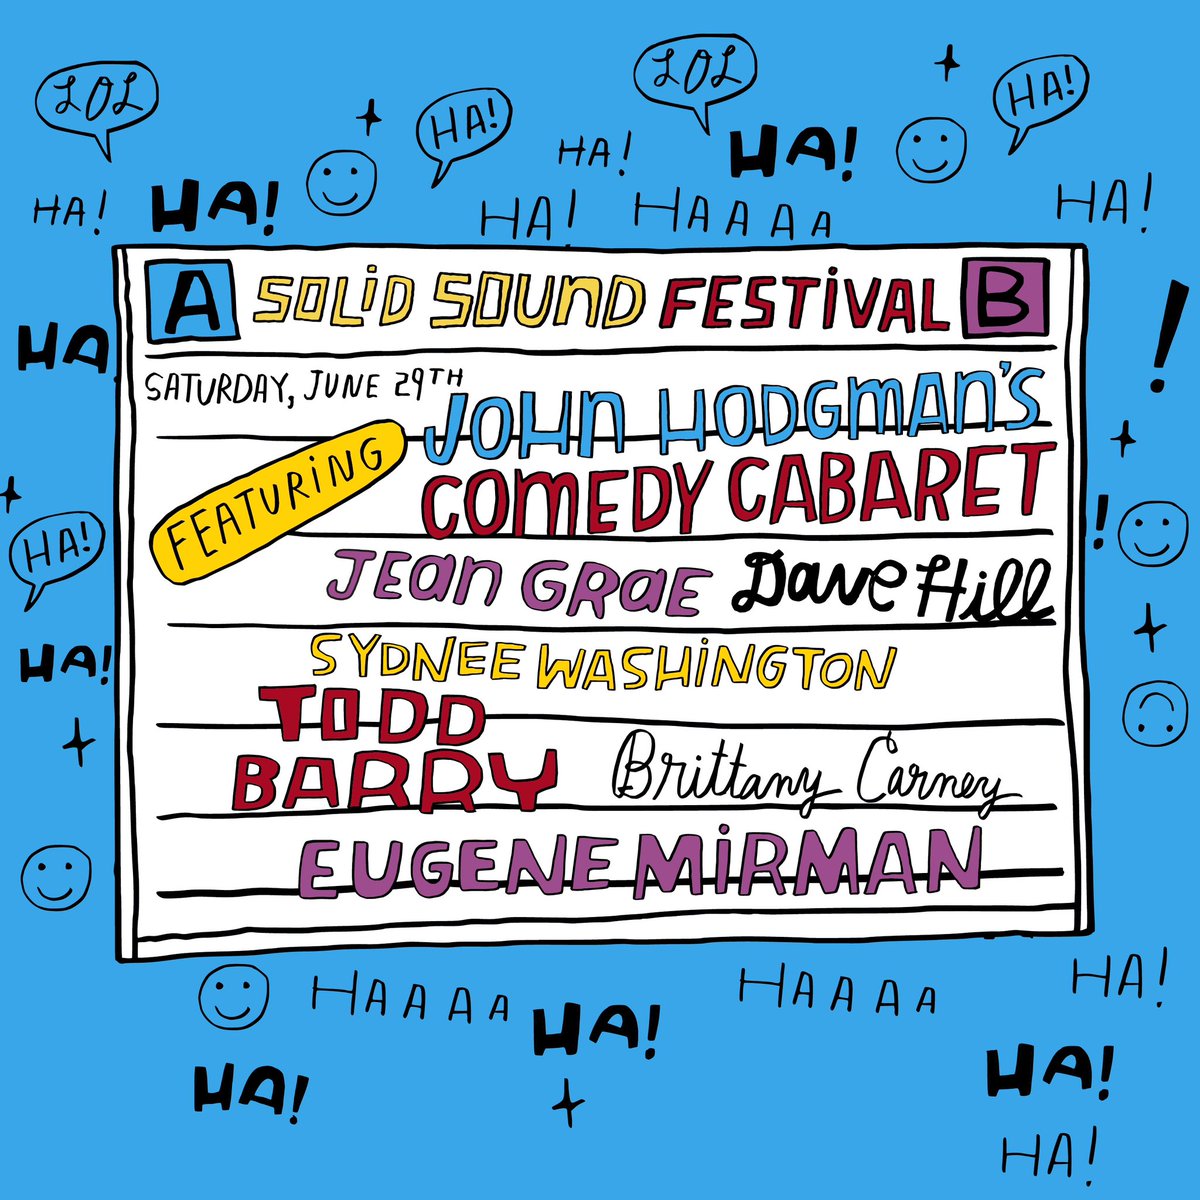 Come see @hodgman’s Comedy Cabaret at @SolidSoundFest on Saturday, June 29! Get tickets now at solidsoundfestival.com